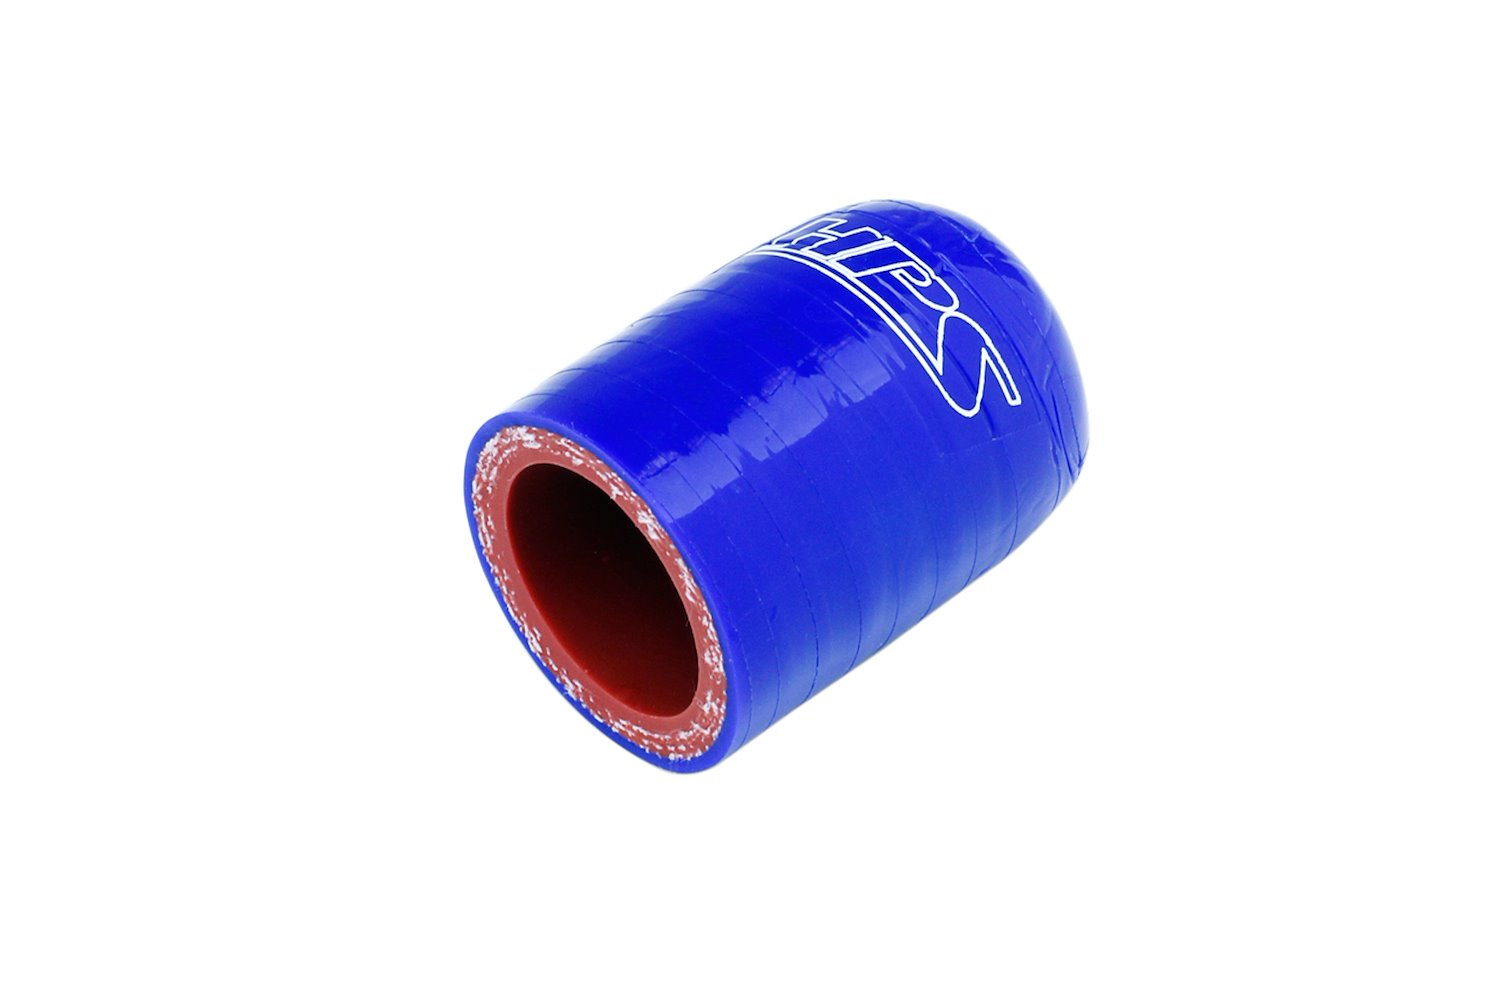 RSCC-032-BLUE Coolant Bypass Cap, 3-Ply Reinforced High-Temp. Silicone Bypass Cap, 5/16 in. ID, Blue